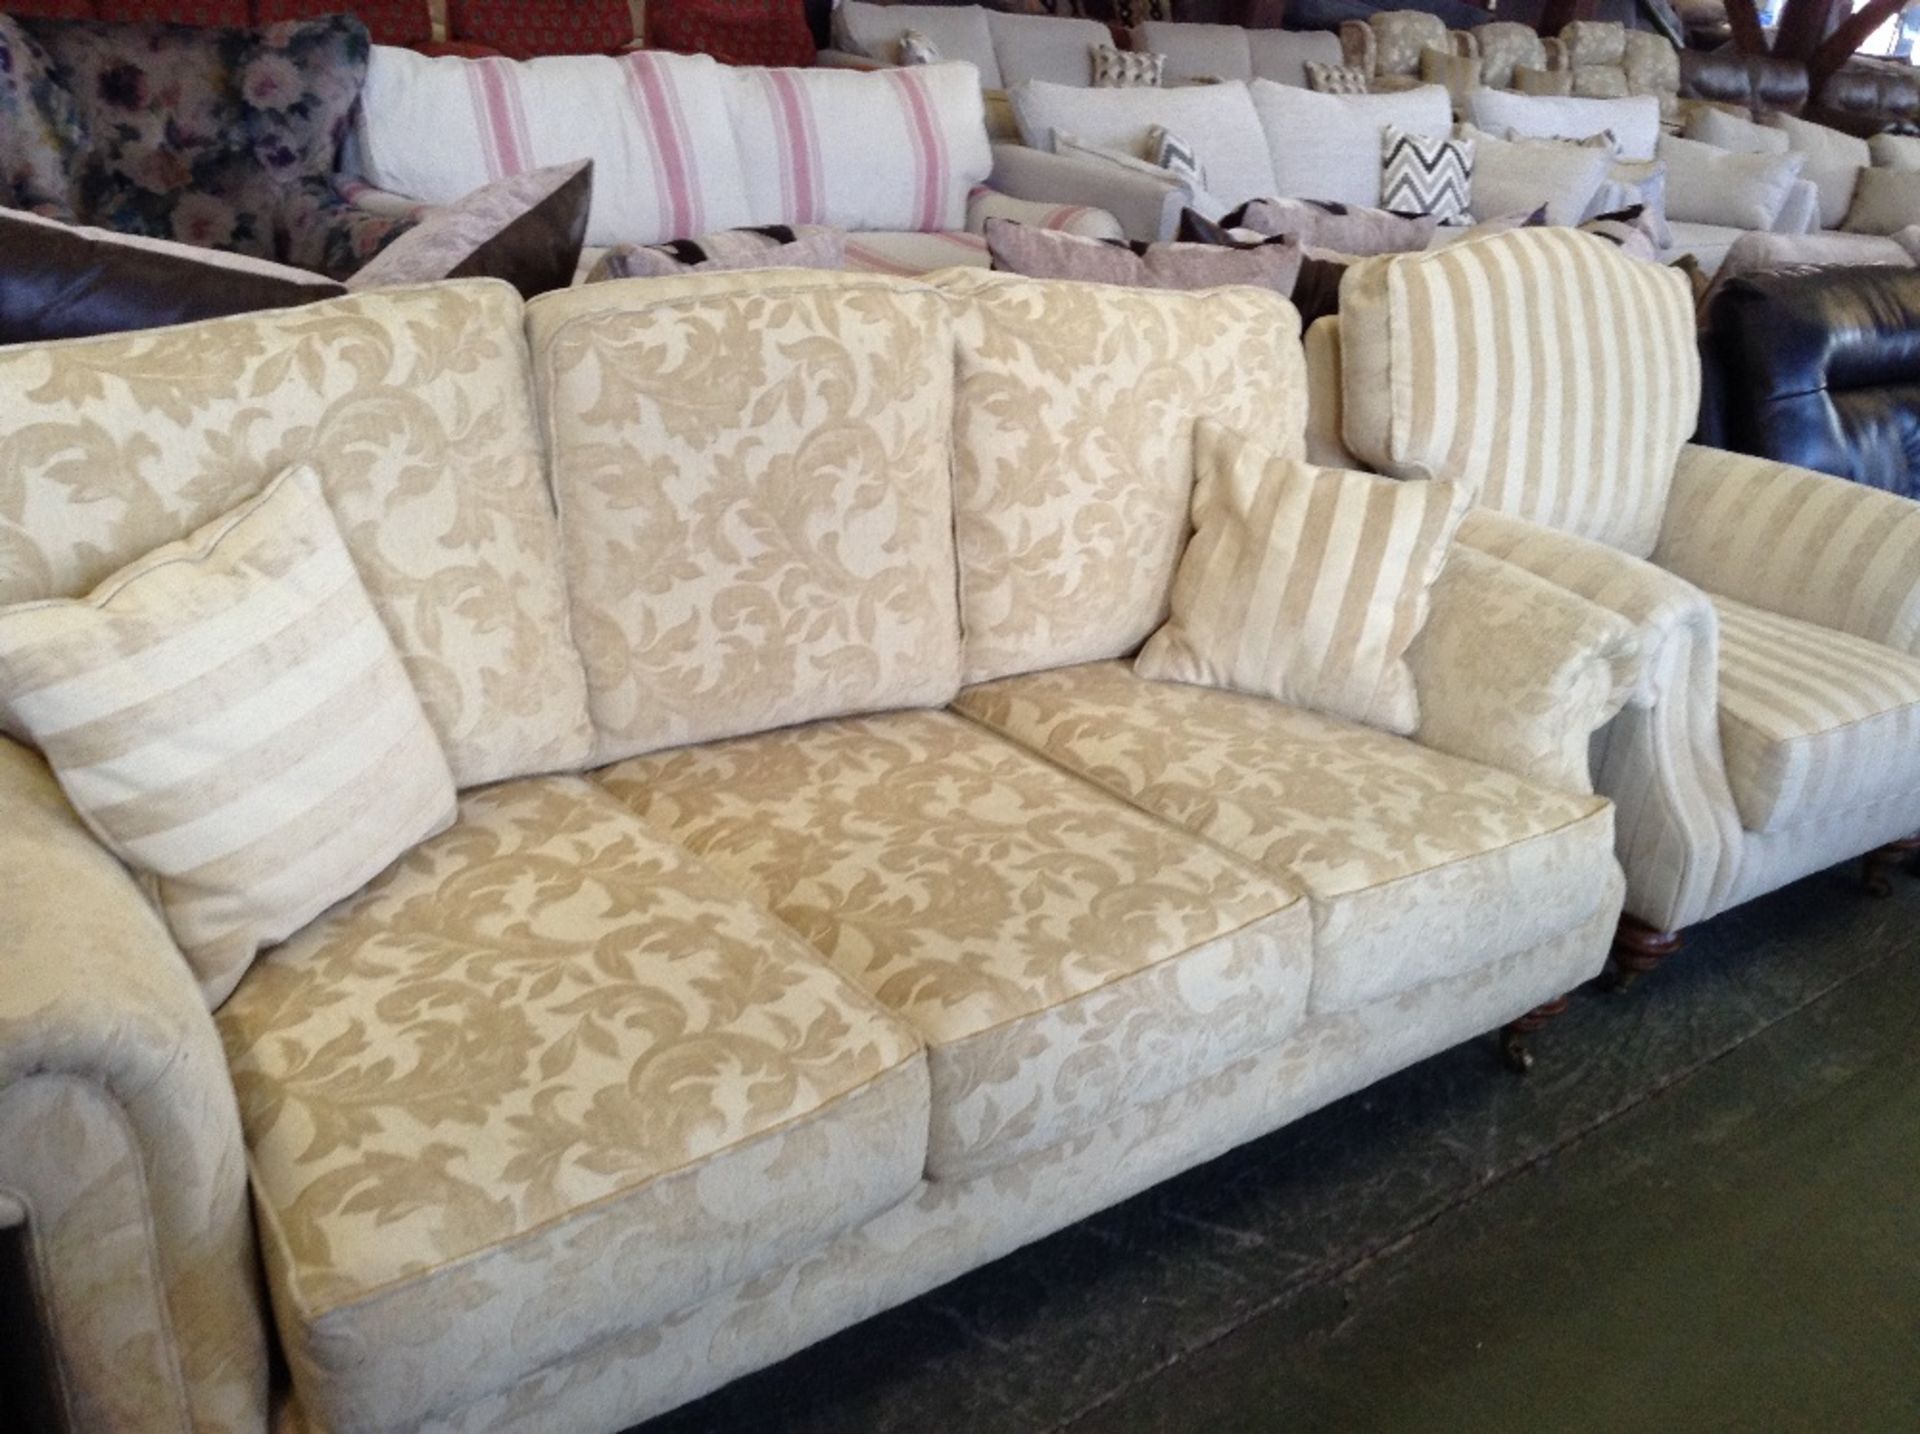 GOLDEN FLORAL PATTERNED 3 SEATER SOFA AND STRIPED